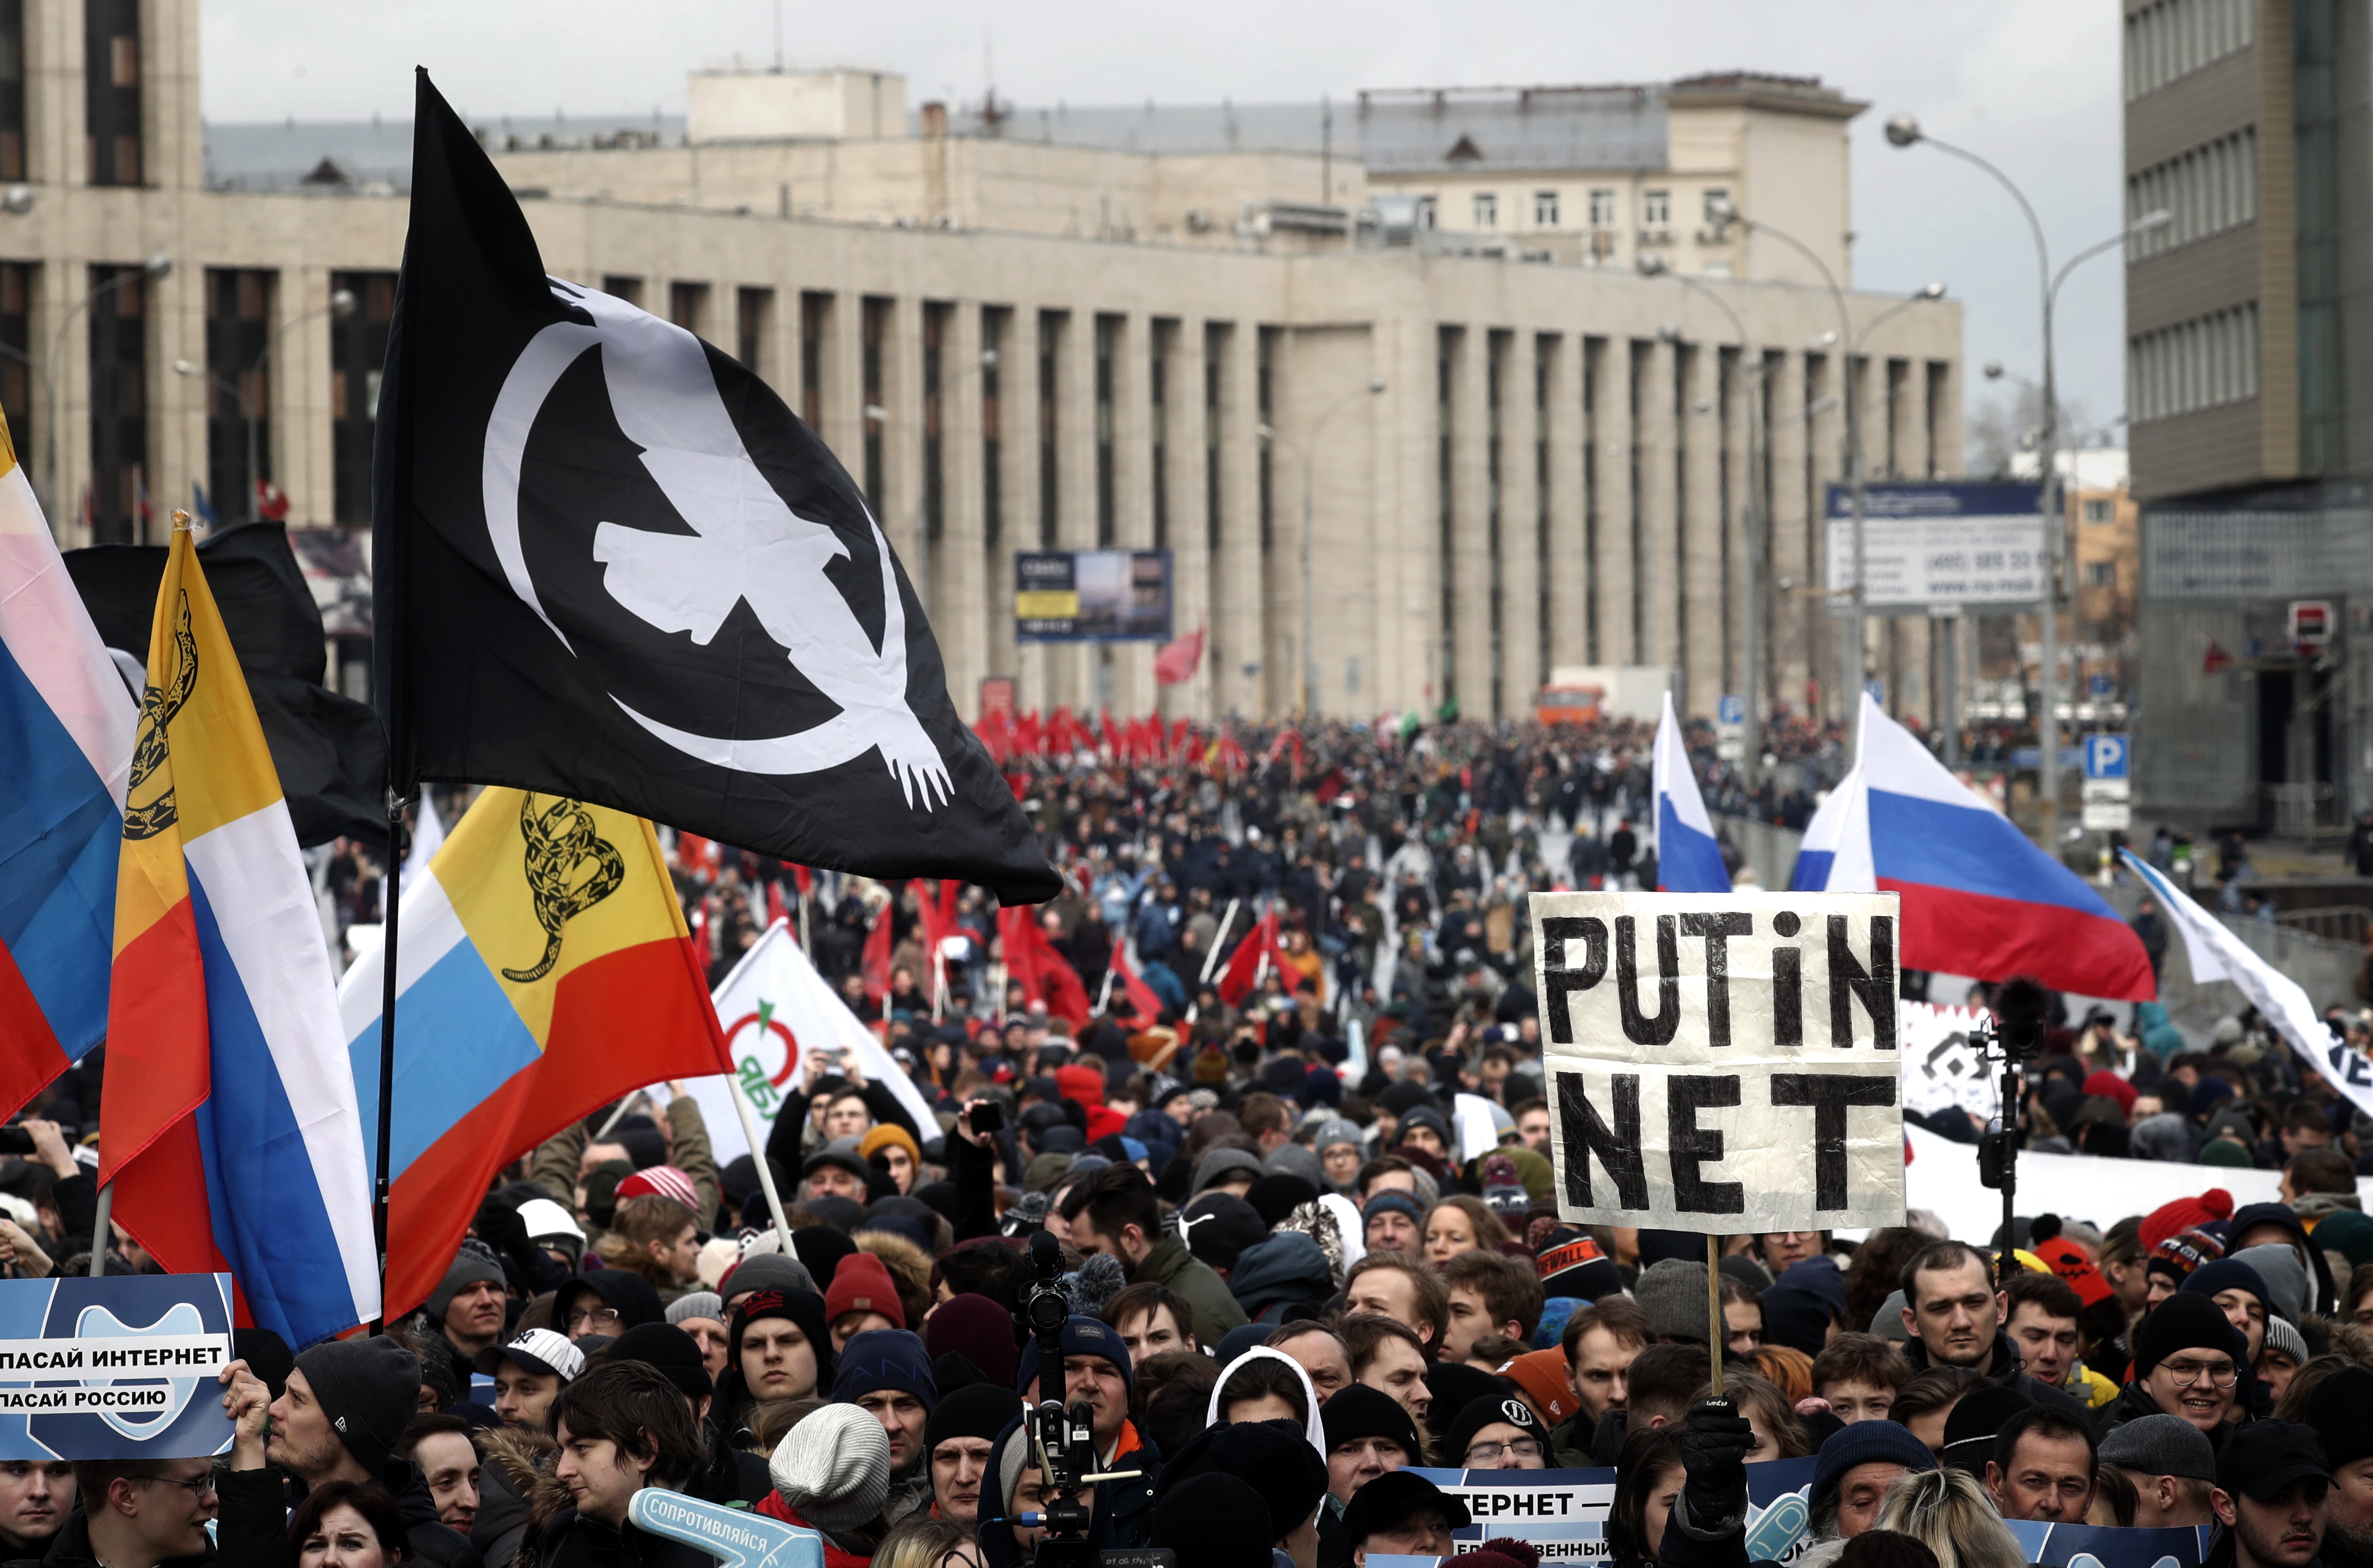 epa07426789 People attend an opposition rally in Moscow, Russia 10 March 2019. Participants in the rally are protesting against the bill about sovereign RuNet and censorship on the Internet.  EPA/MAXIM SHIPENKOV